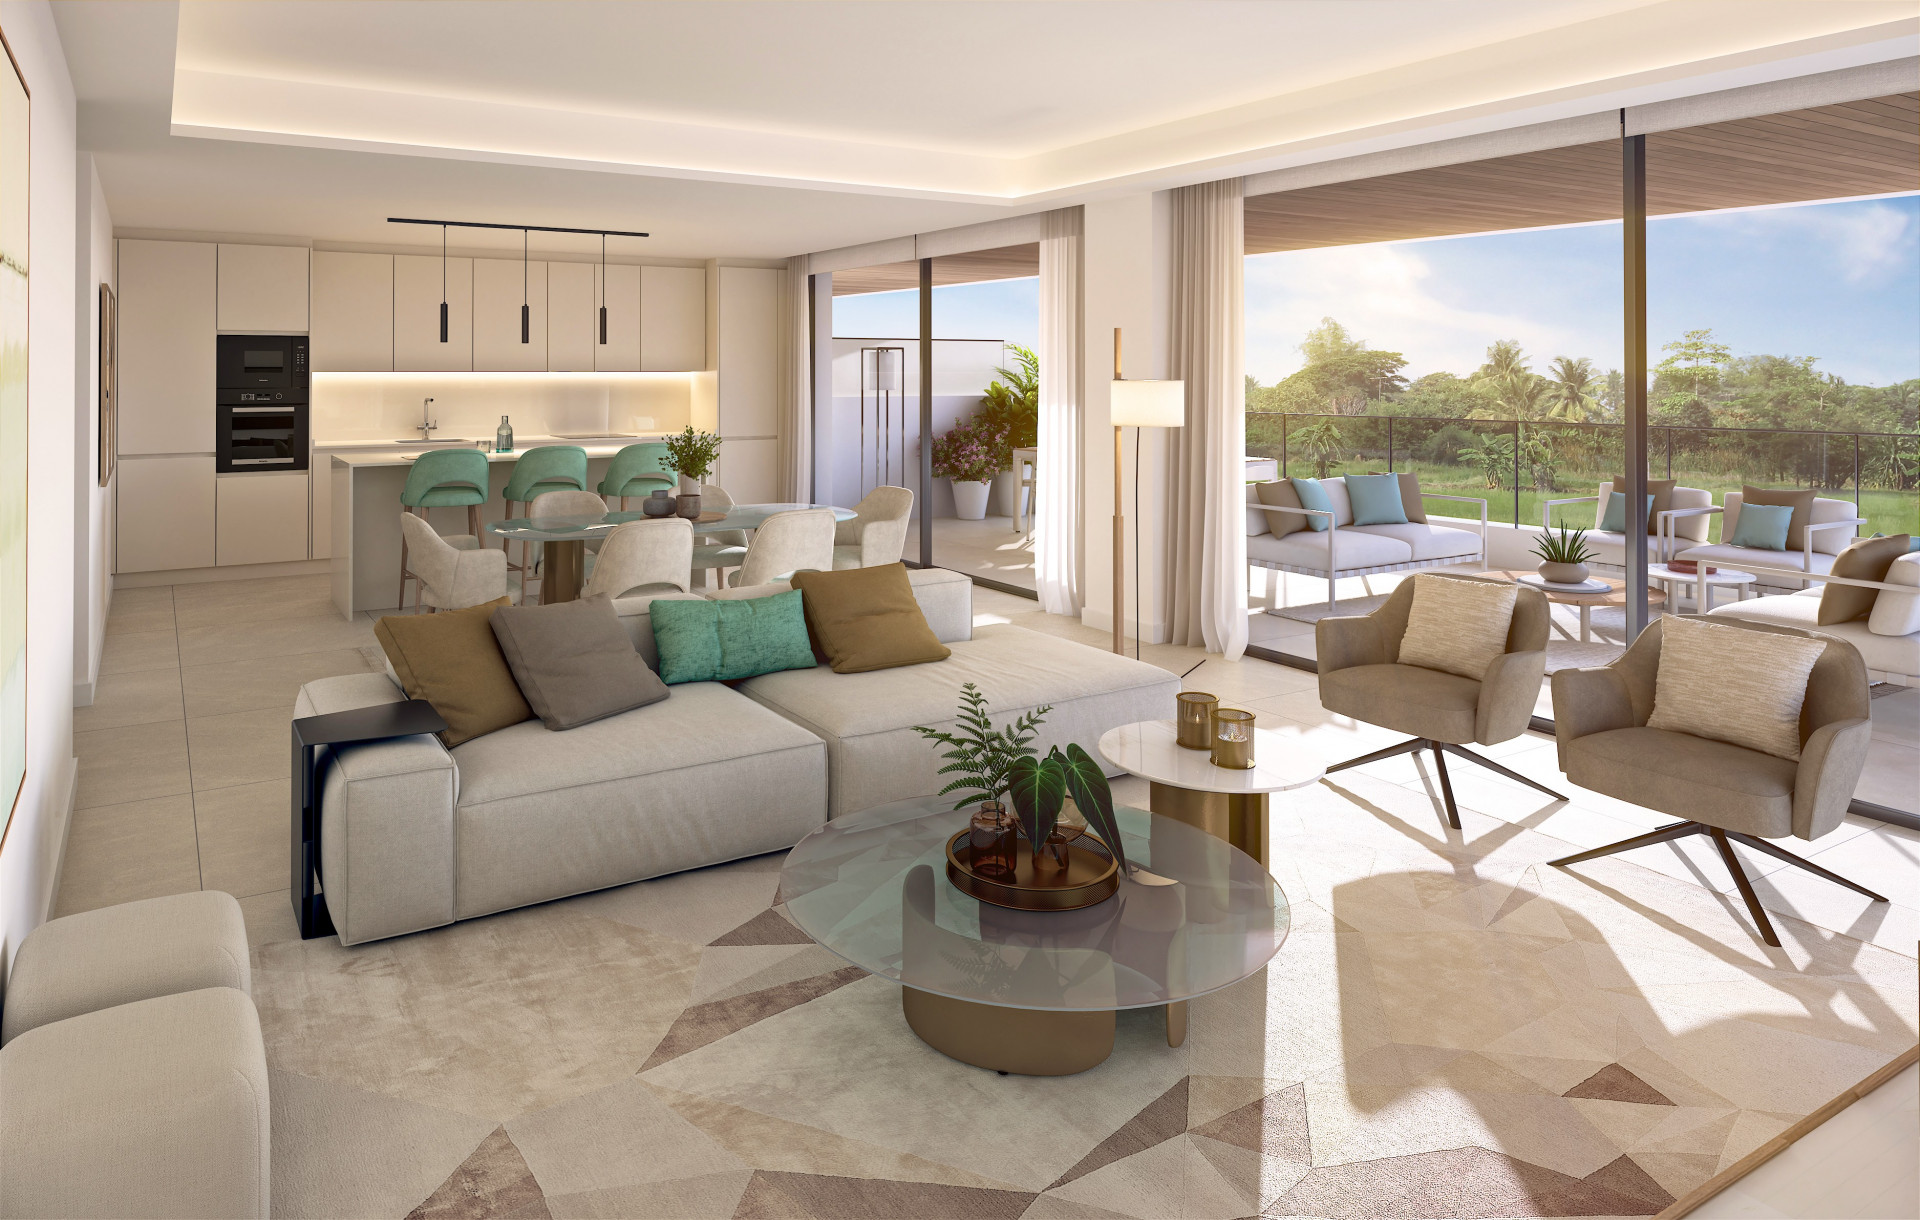 New development offering 88 units, comprising two and three bedroom apartments, duplex apartments and penthouses located in the El Paraiso/Atalaya area